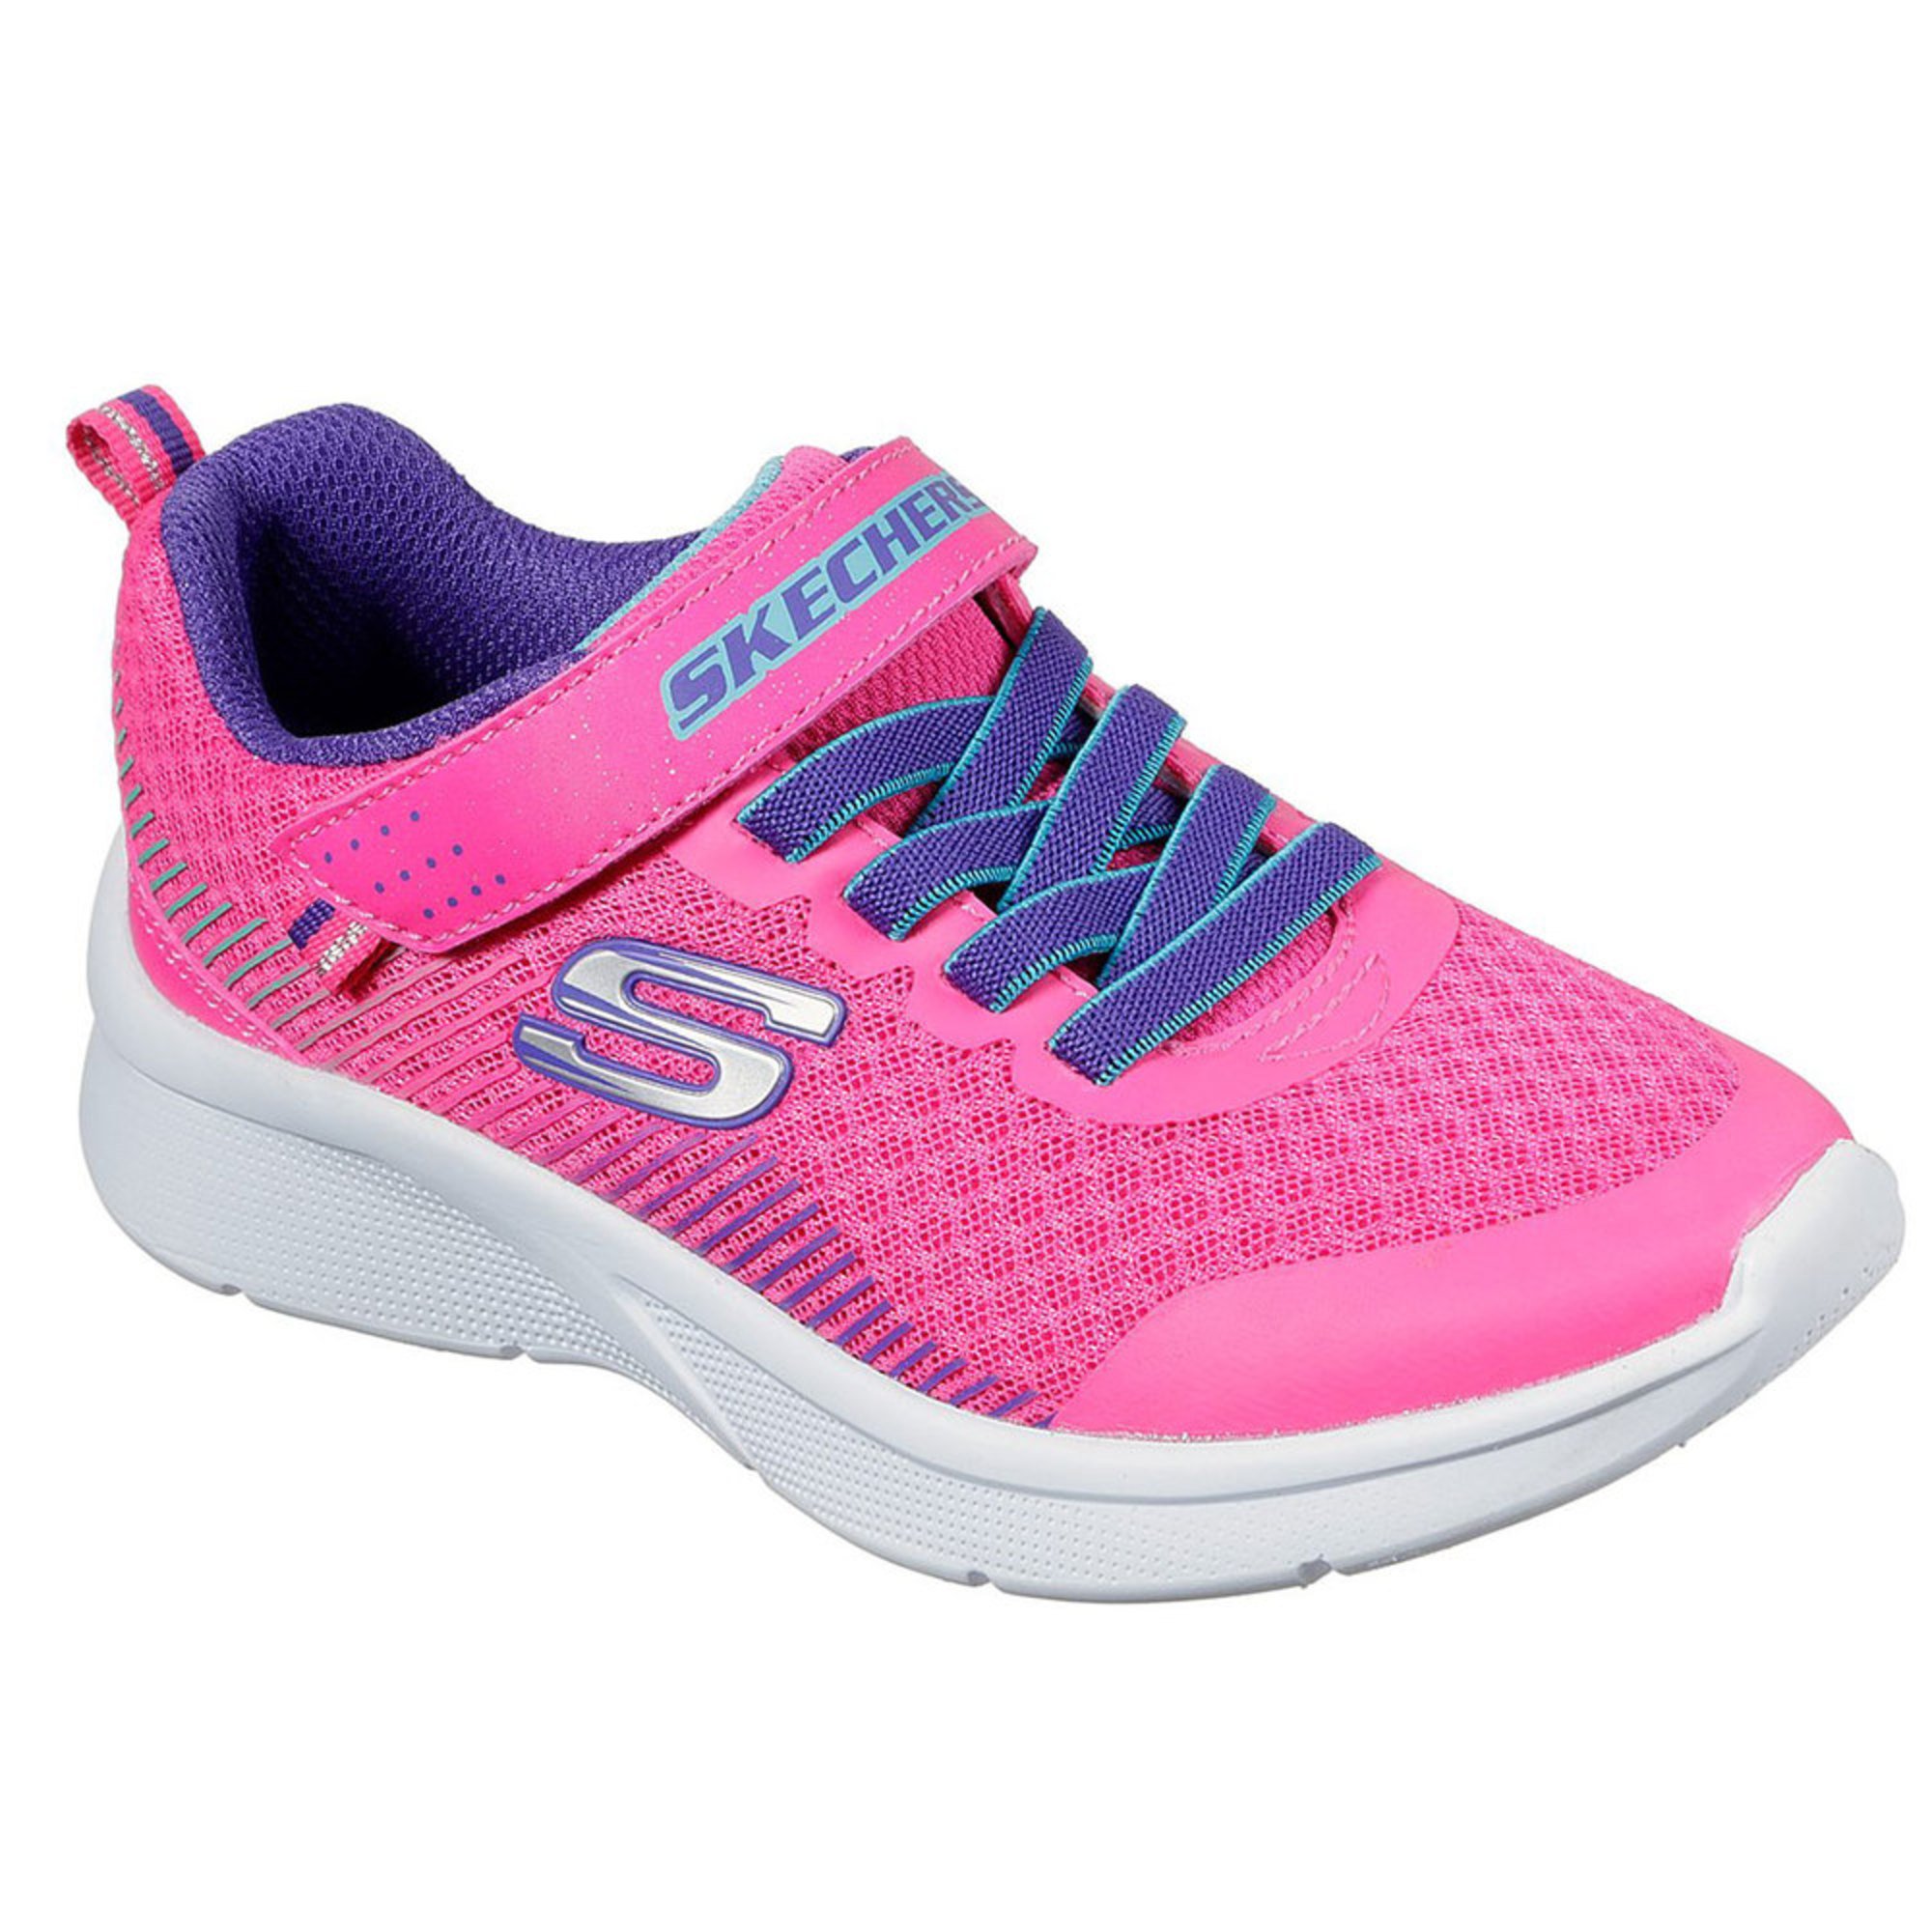 sketchers official site